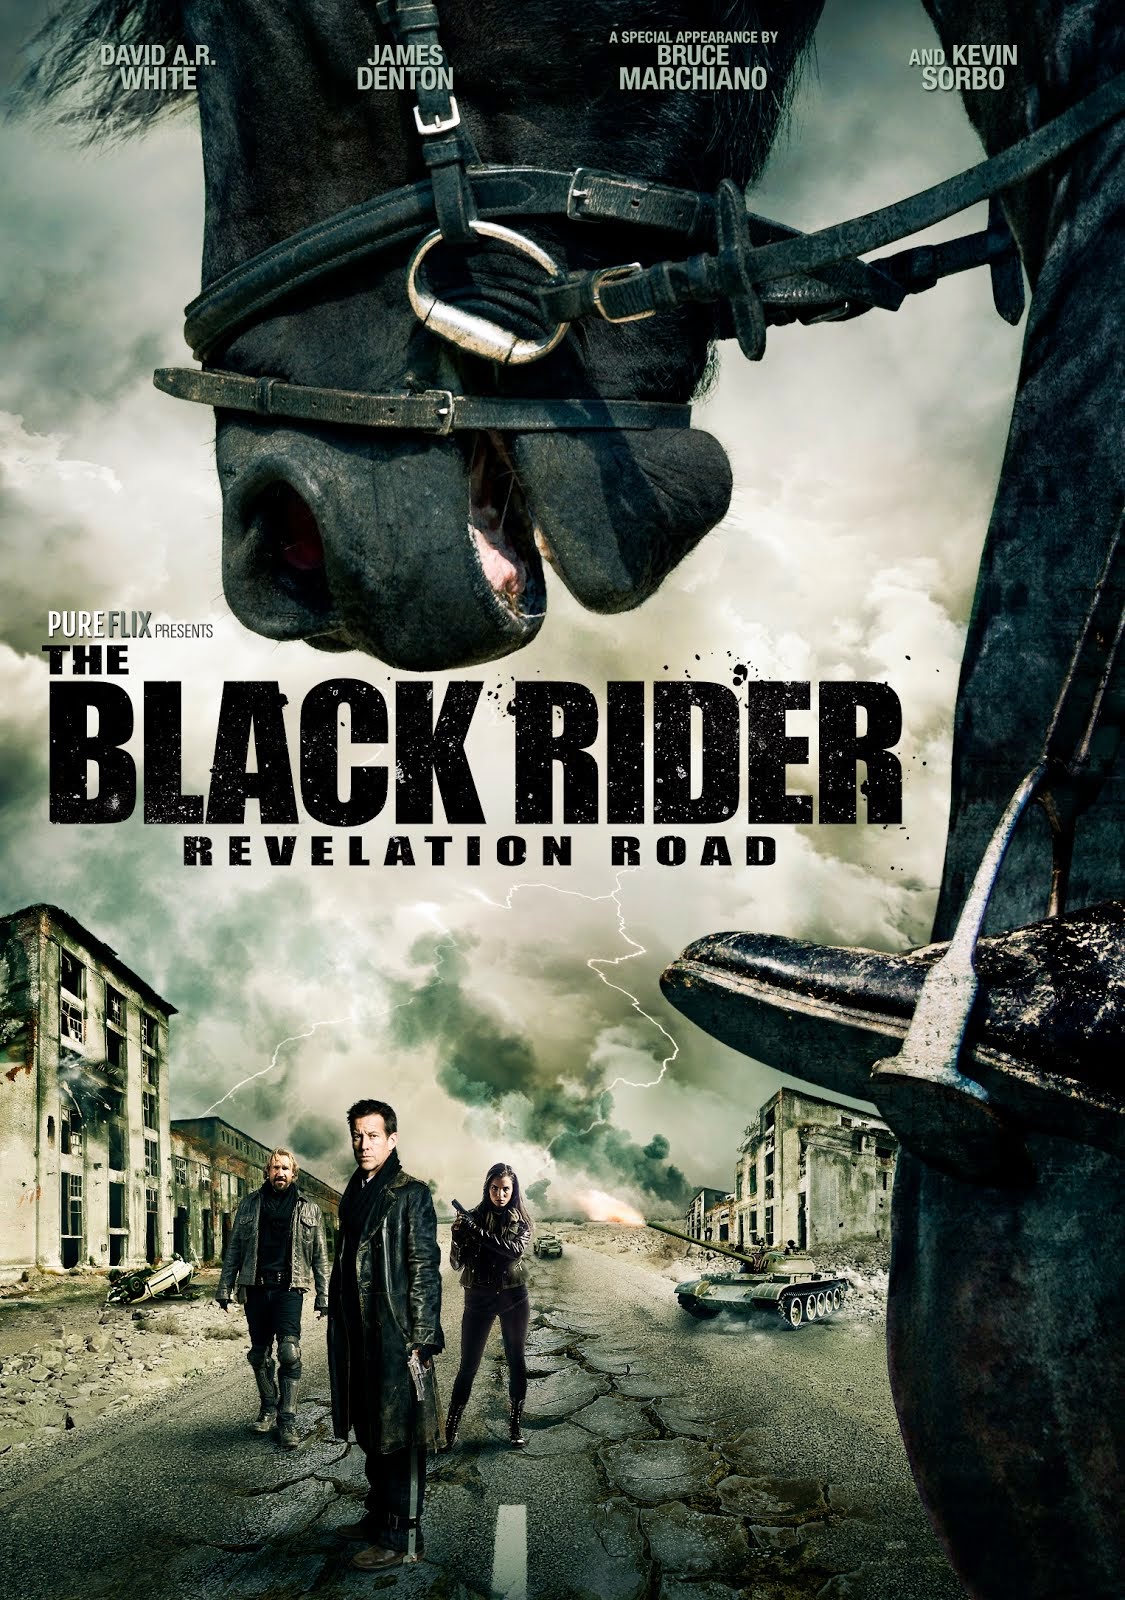 The Black Rider: Revelation Road In Stores Today!